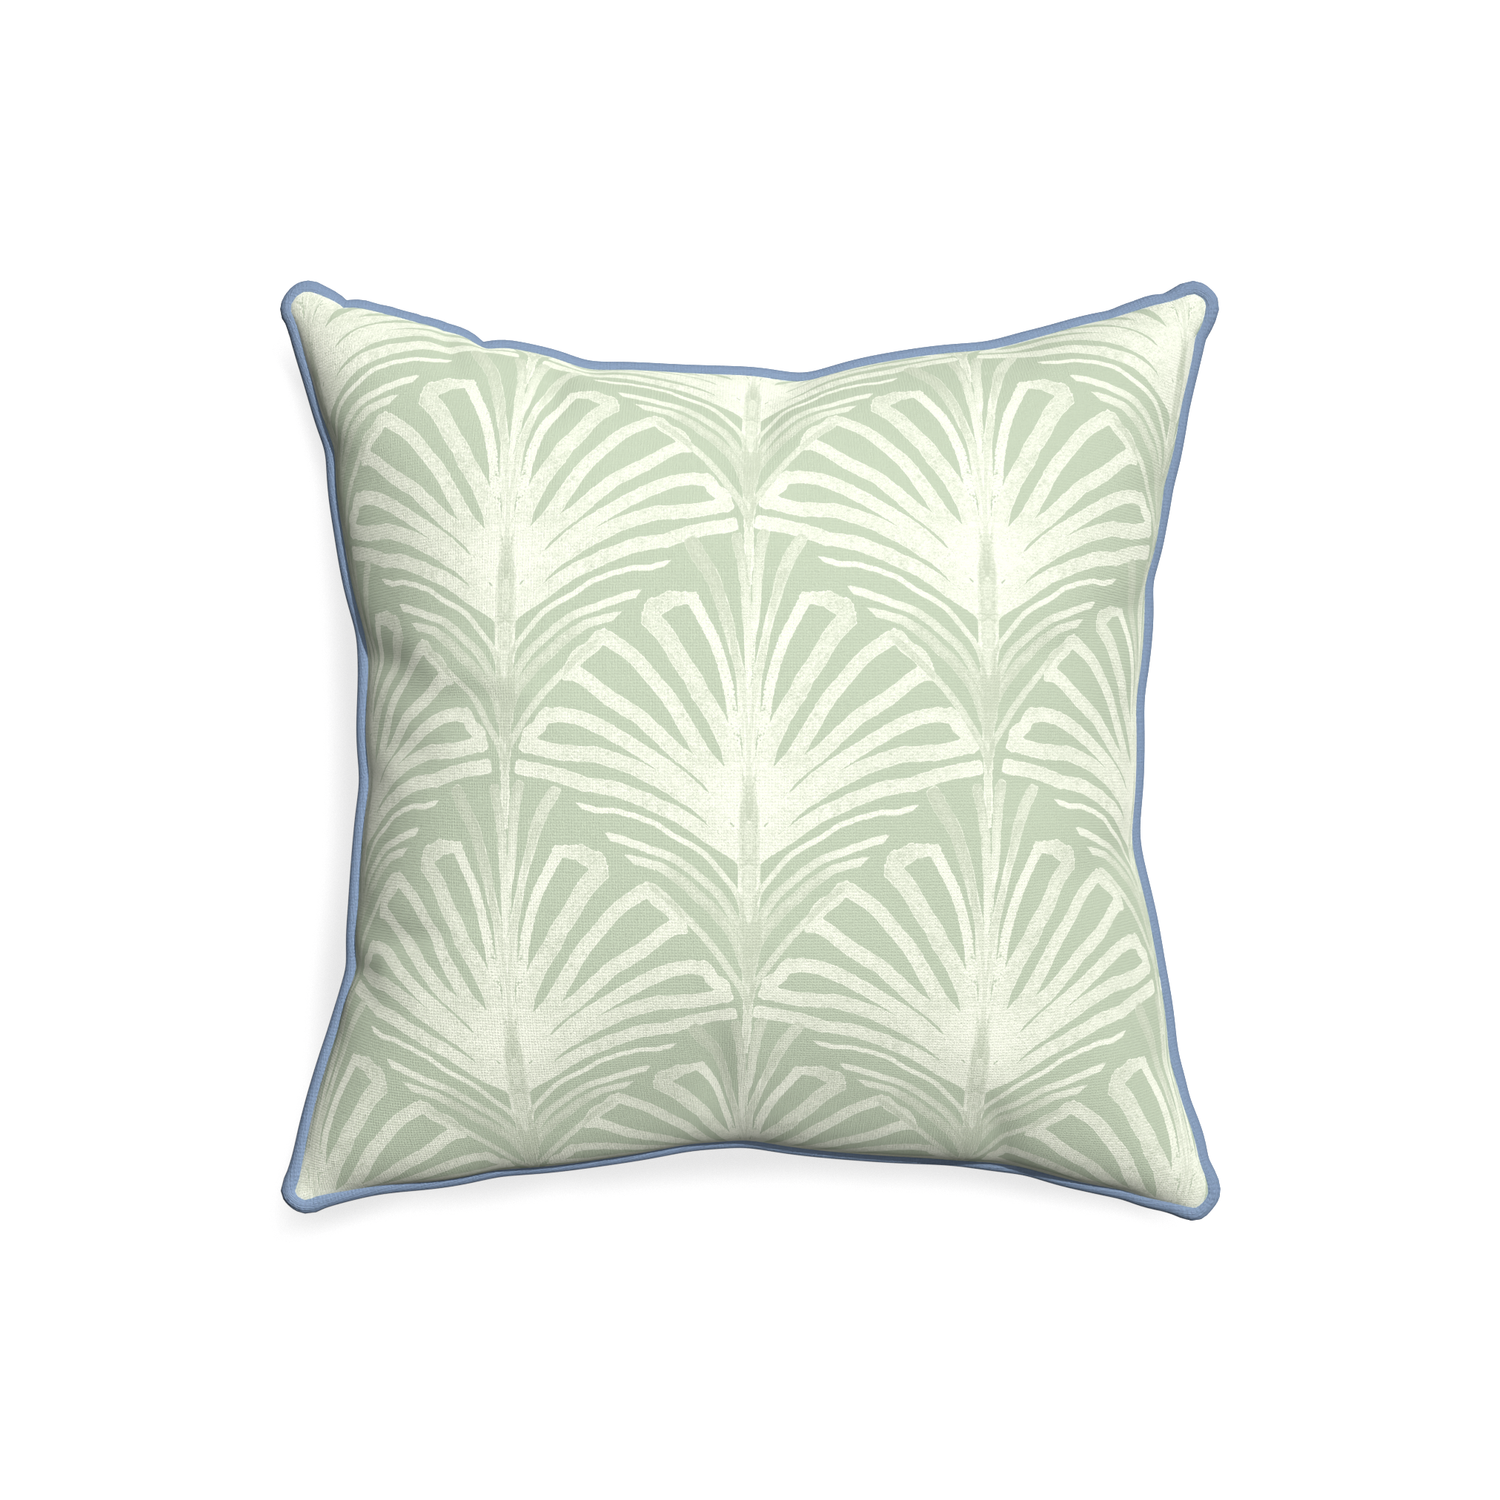 20-square suzy sage custom pillow with sky piping on white background